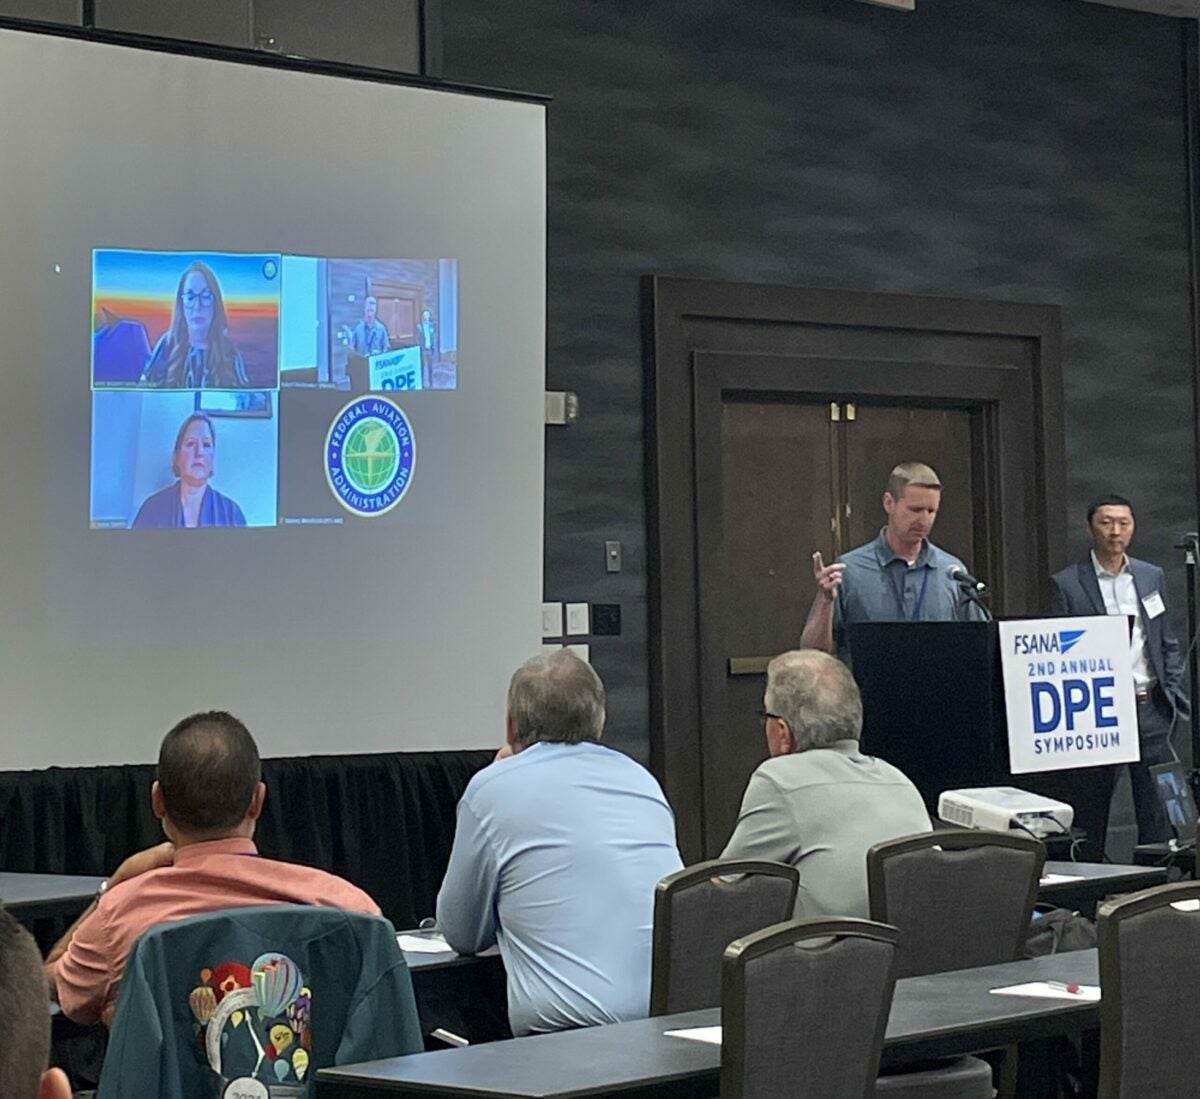 DPE Symposium Focuses on Backlog of Practical Testing, Solutions